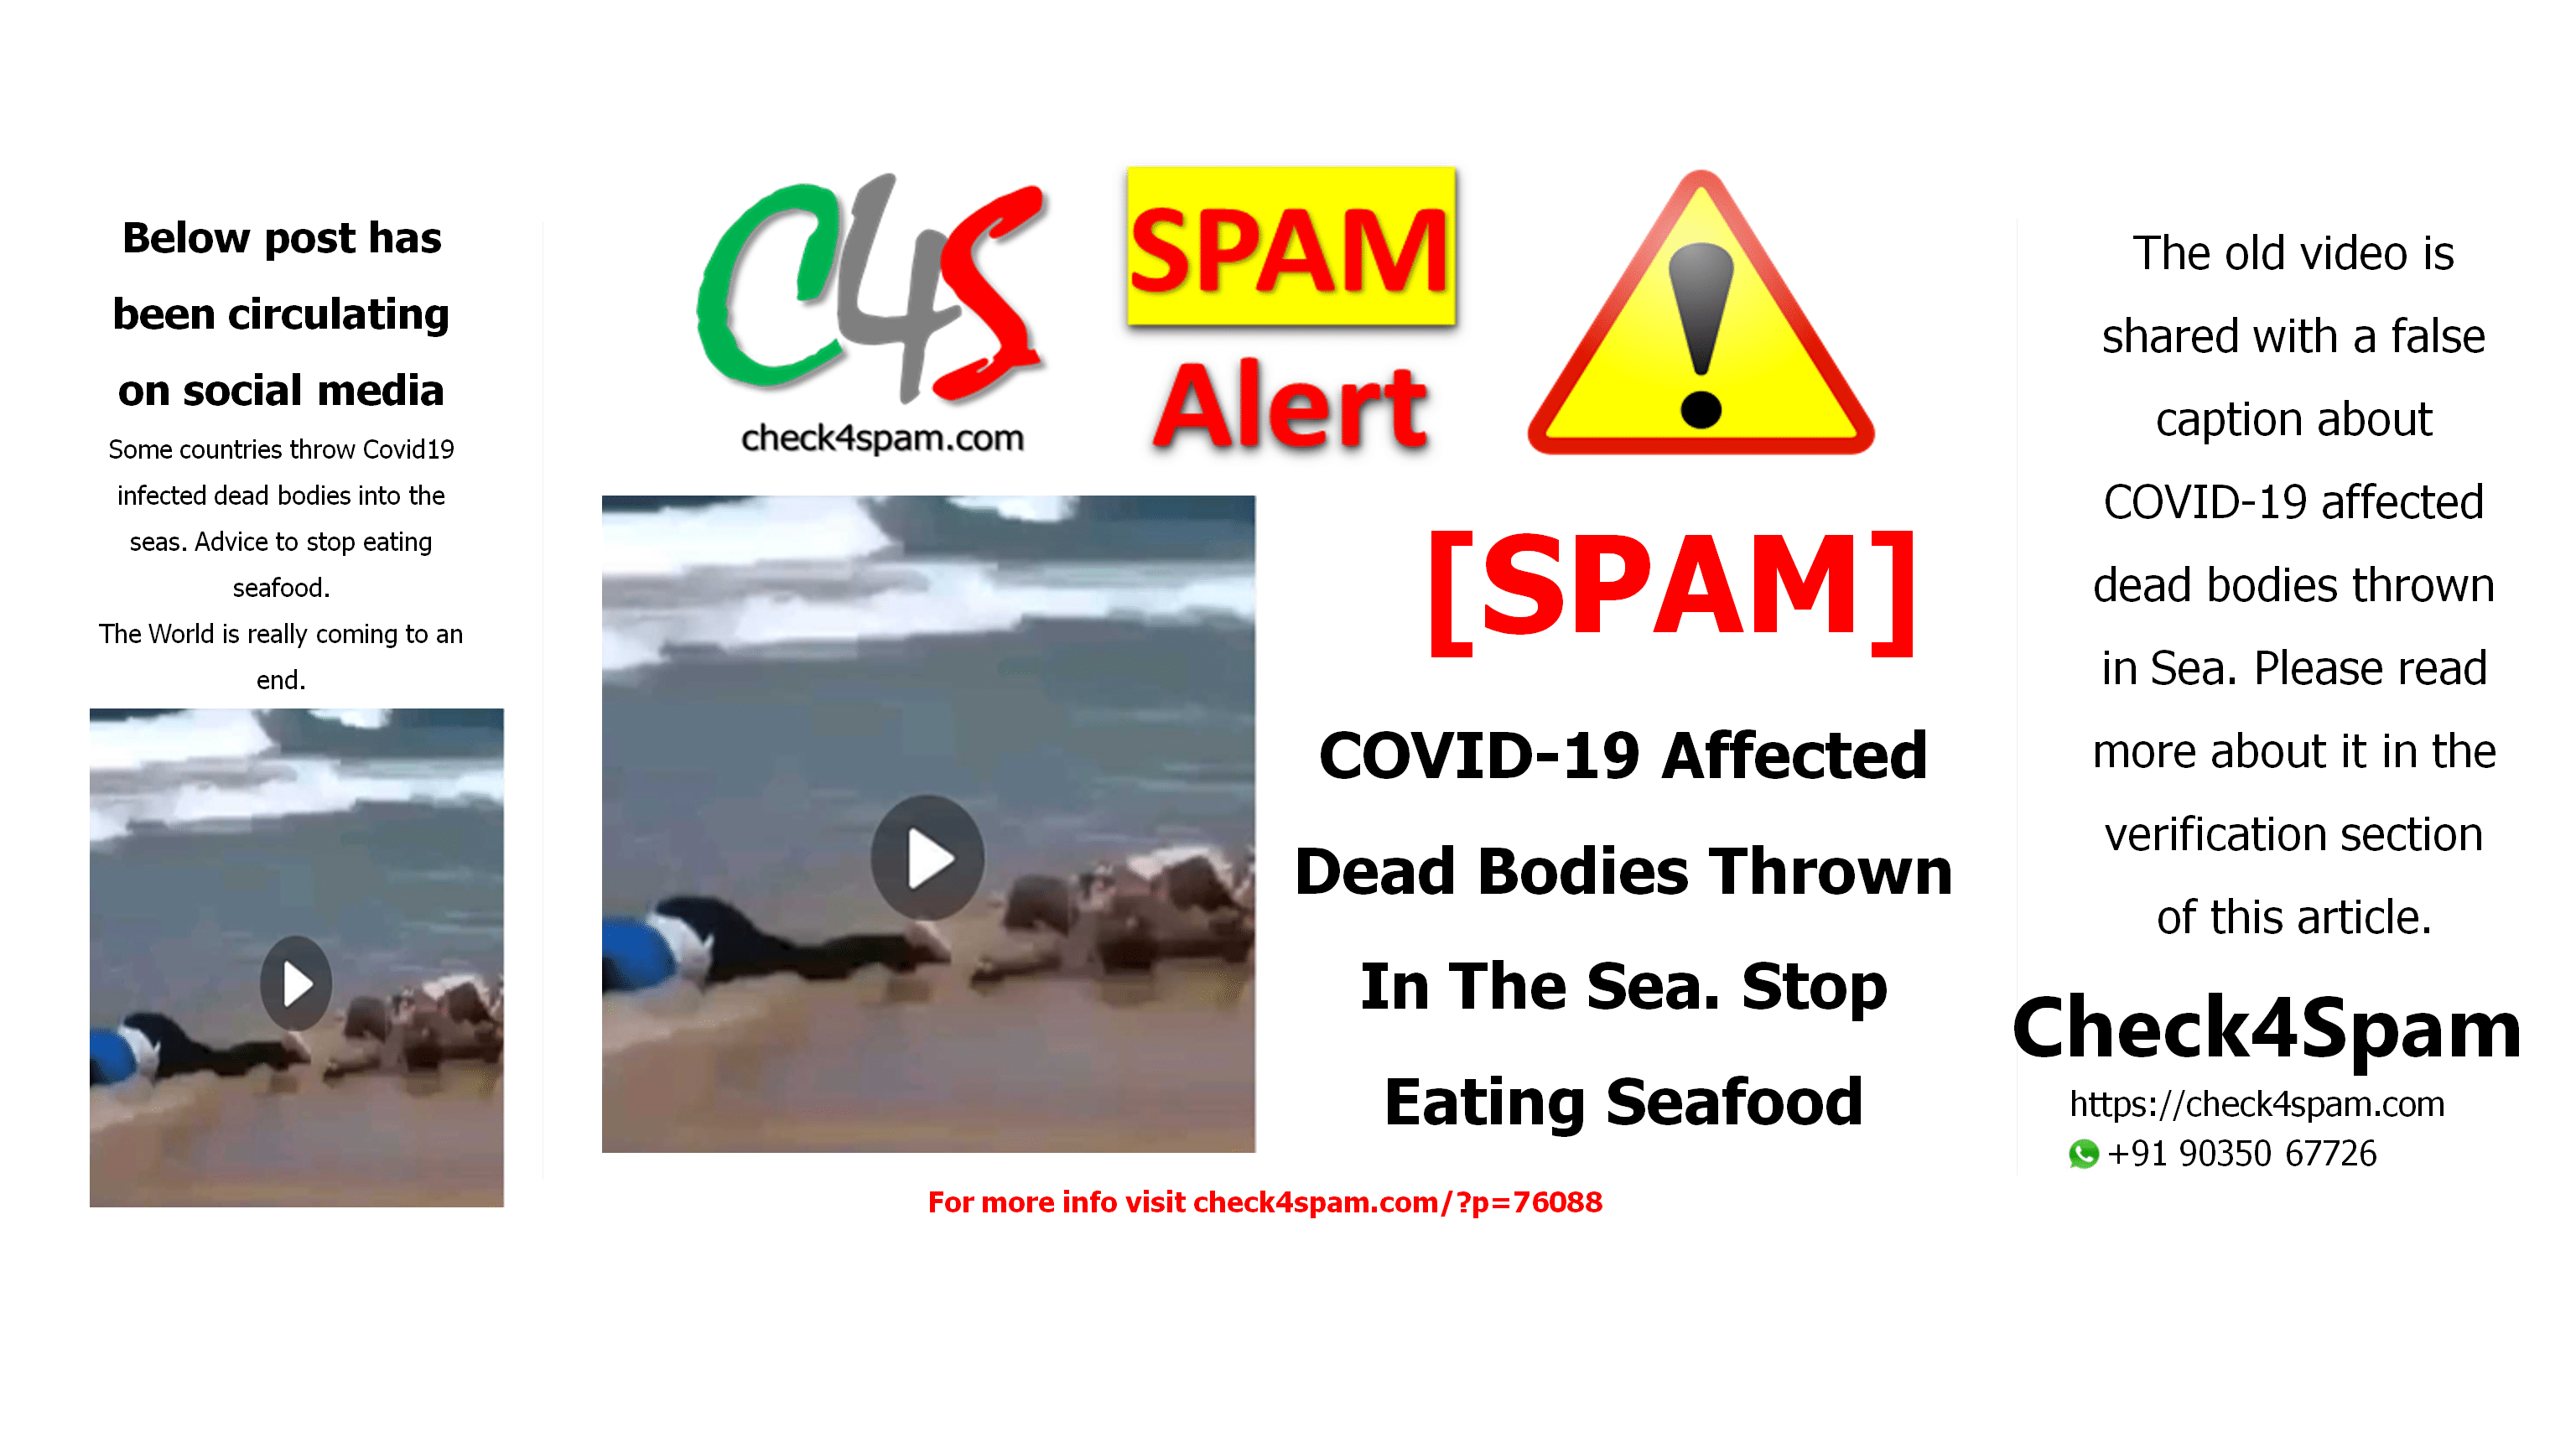 COVID-19 Affected Dead Bodies Thrown In The Sea. Stop Eating Seafood